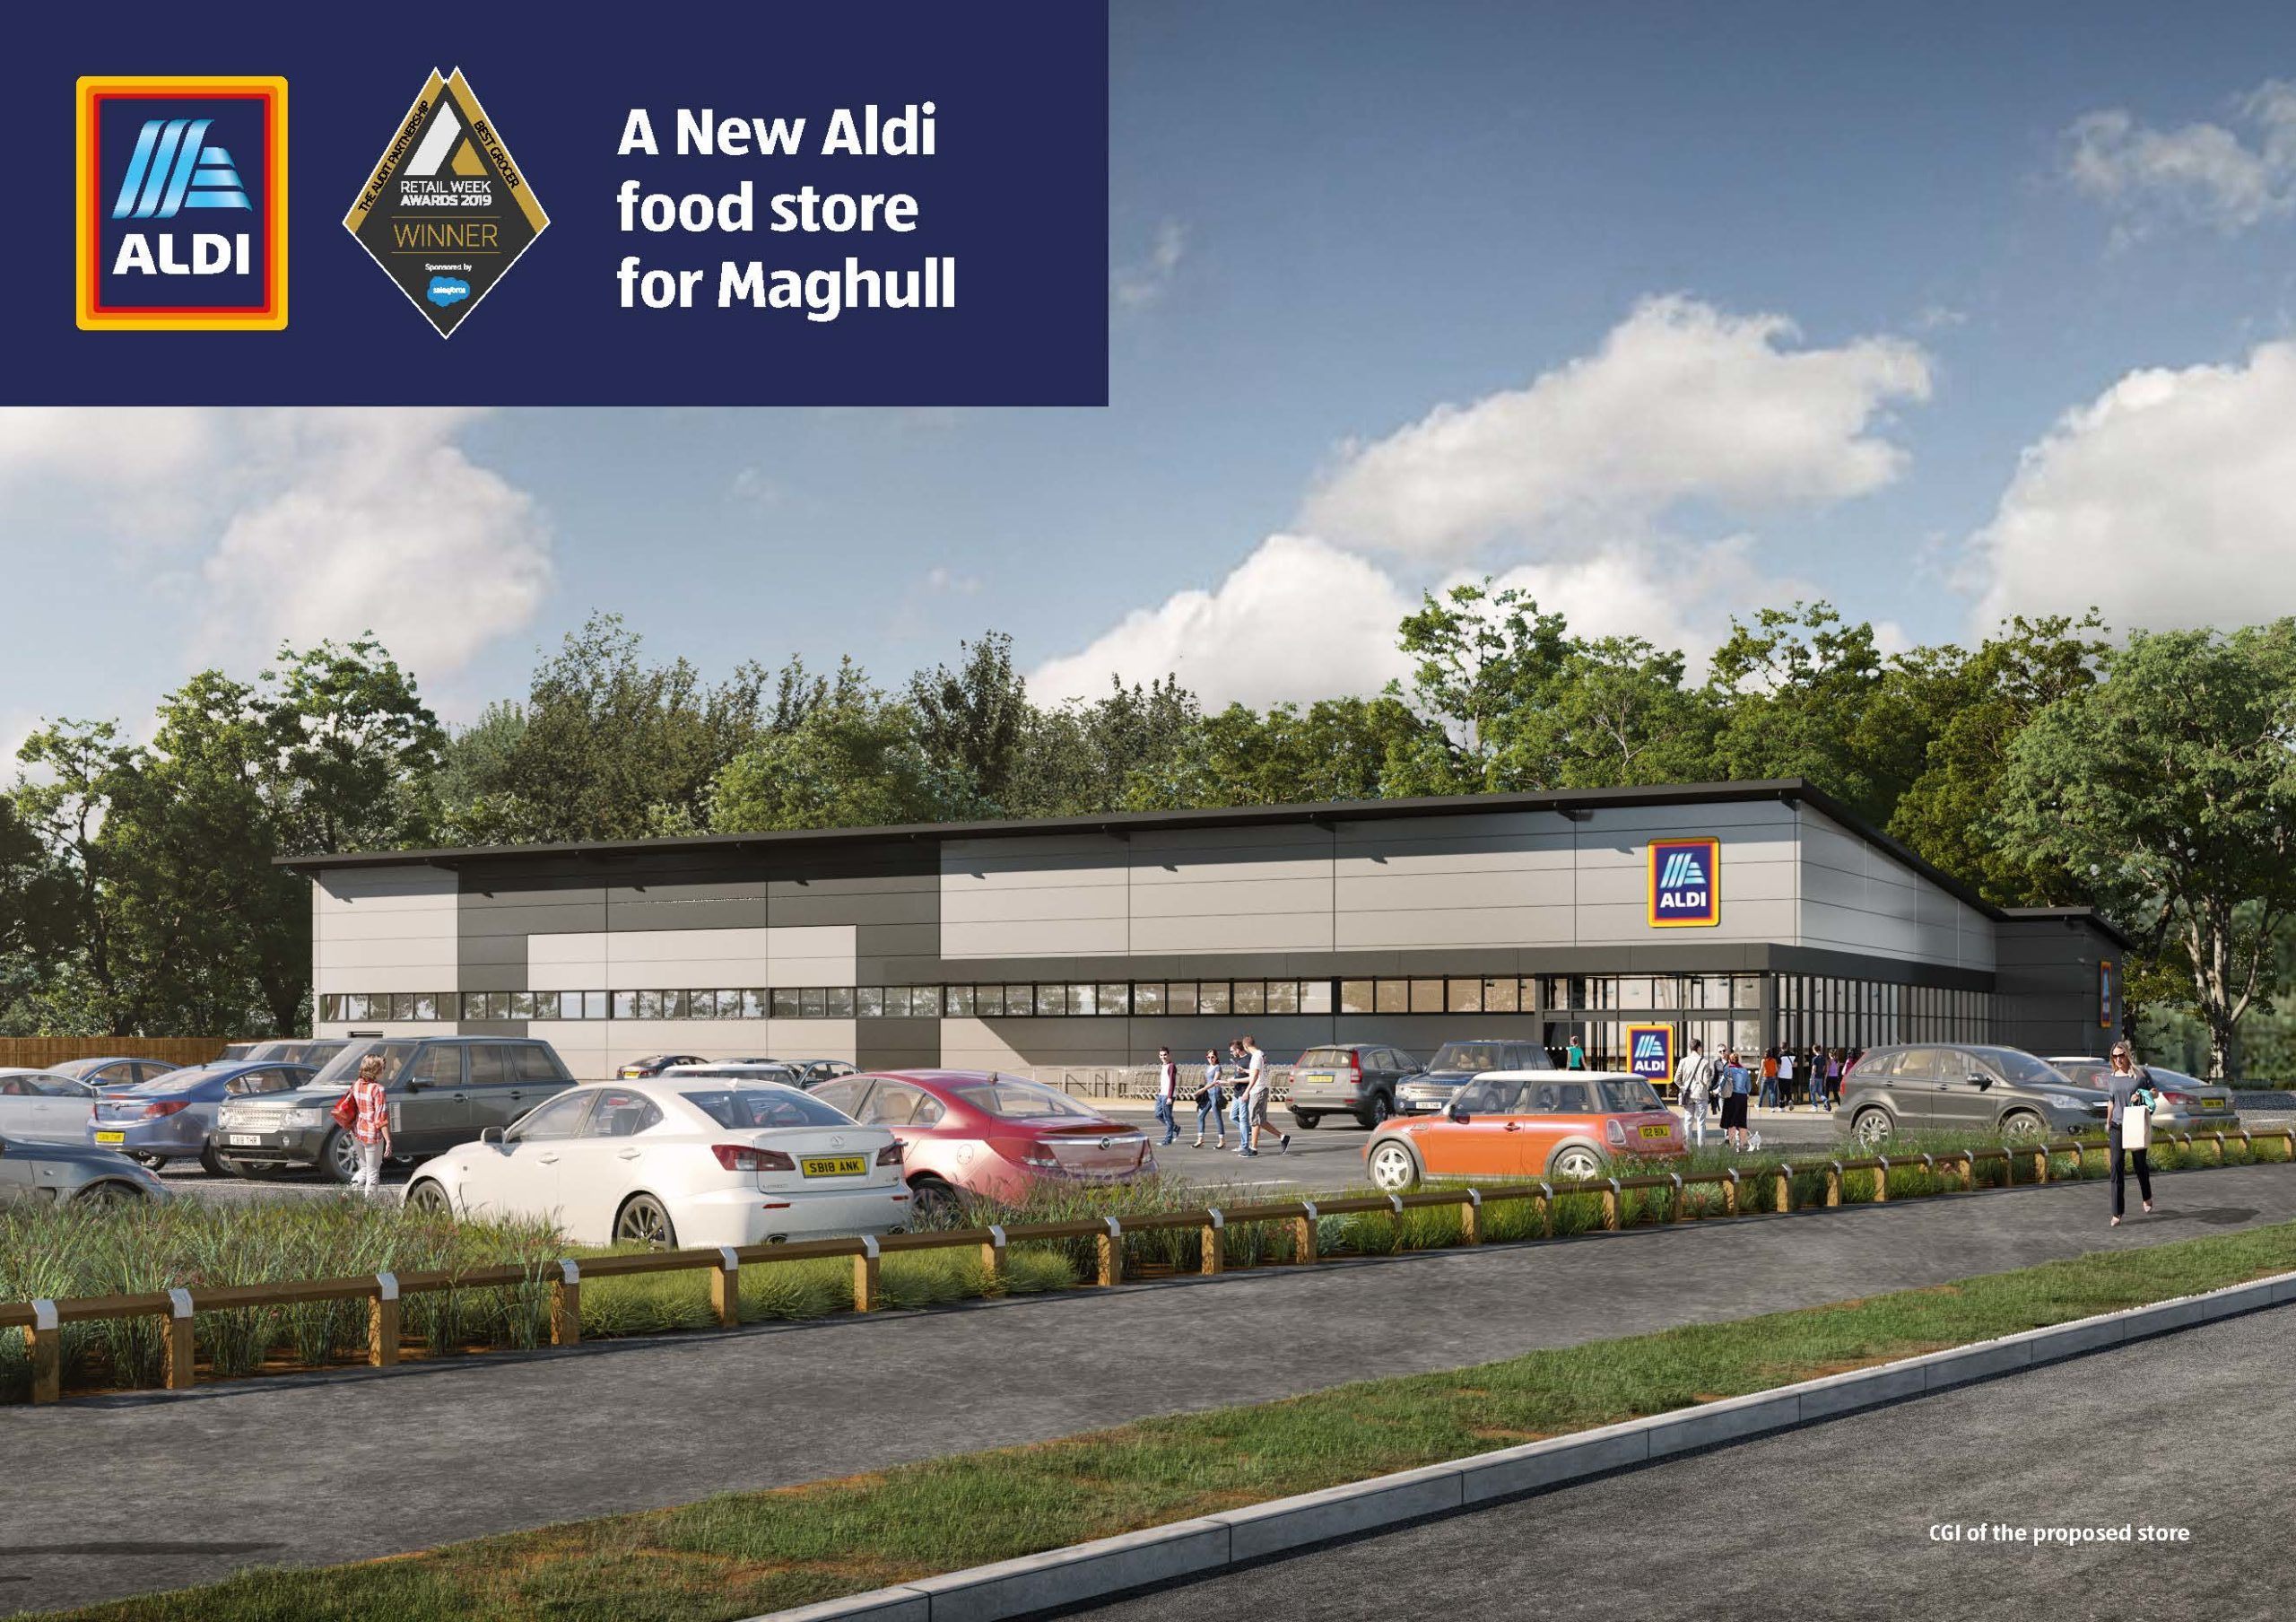 CGI of New Aldi Store for Maghull